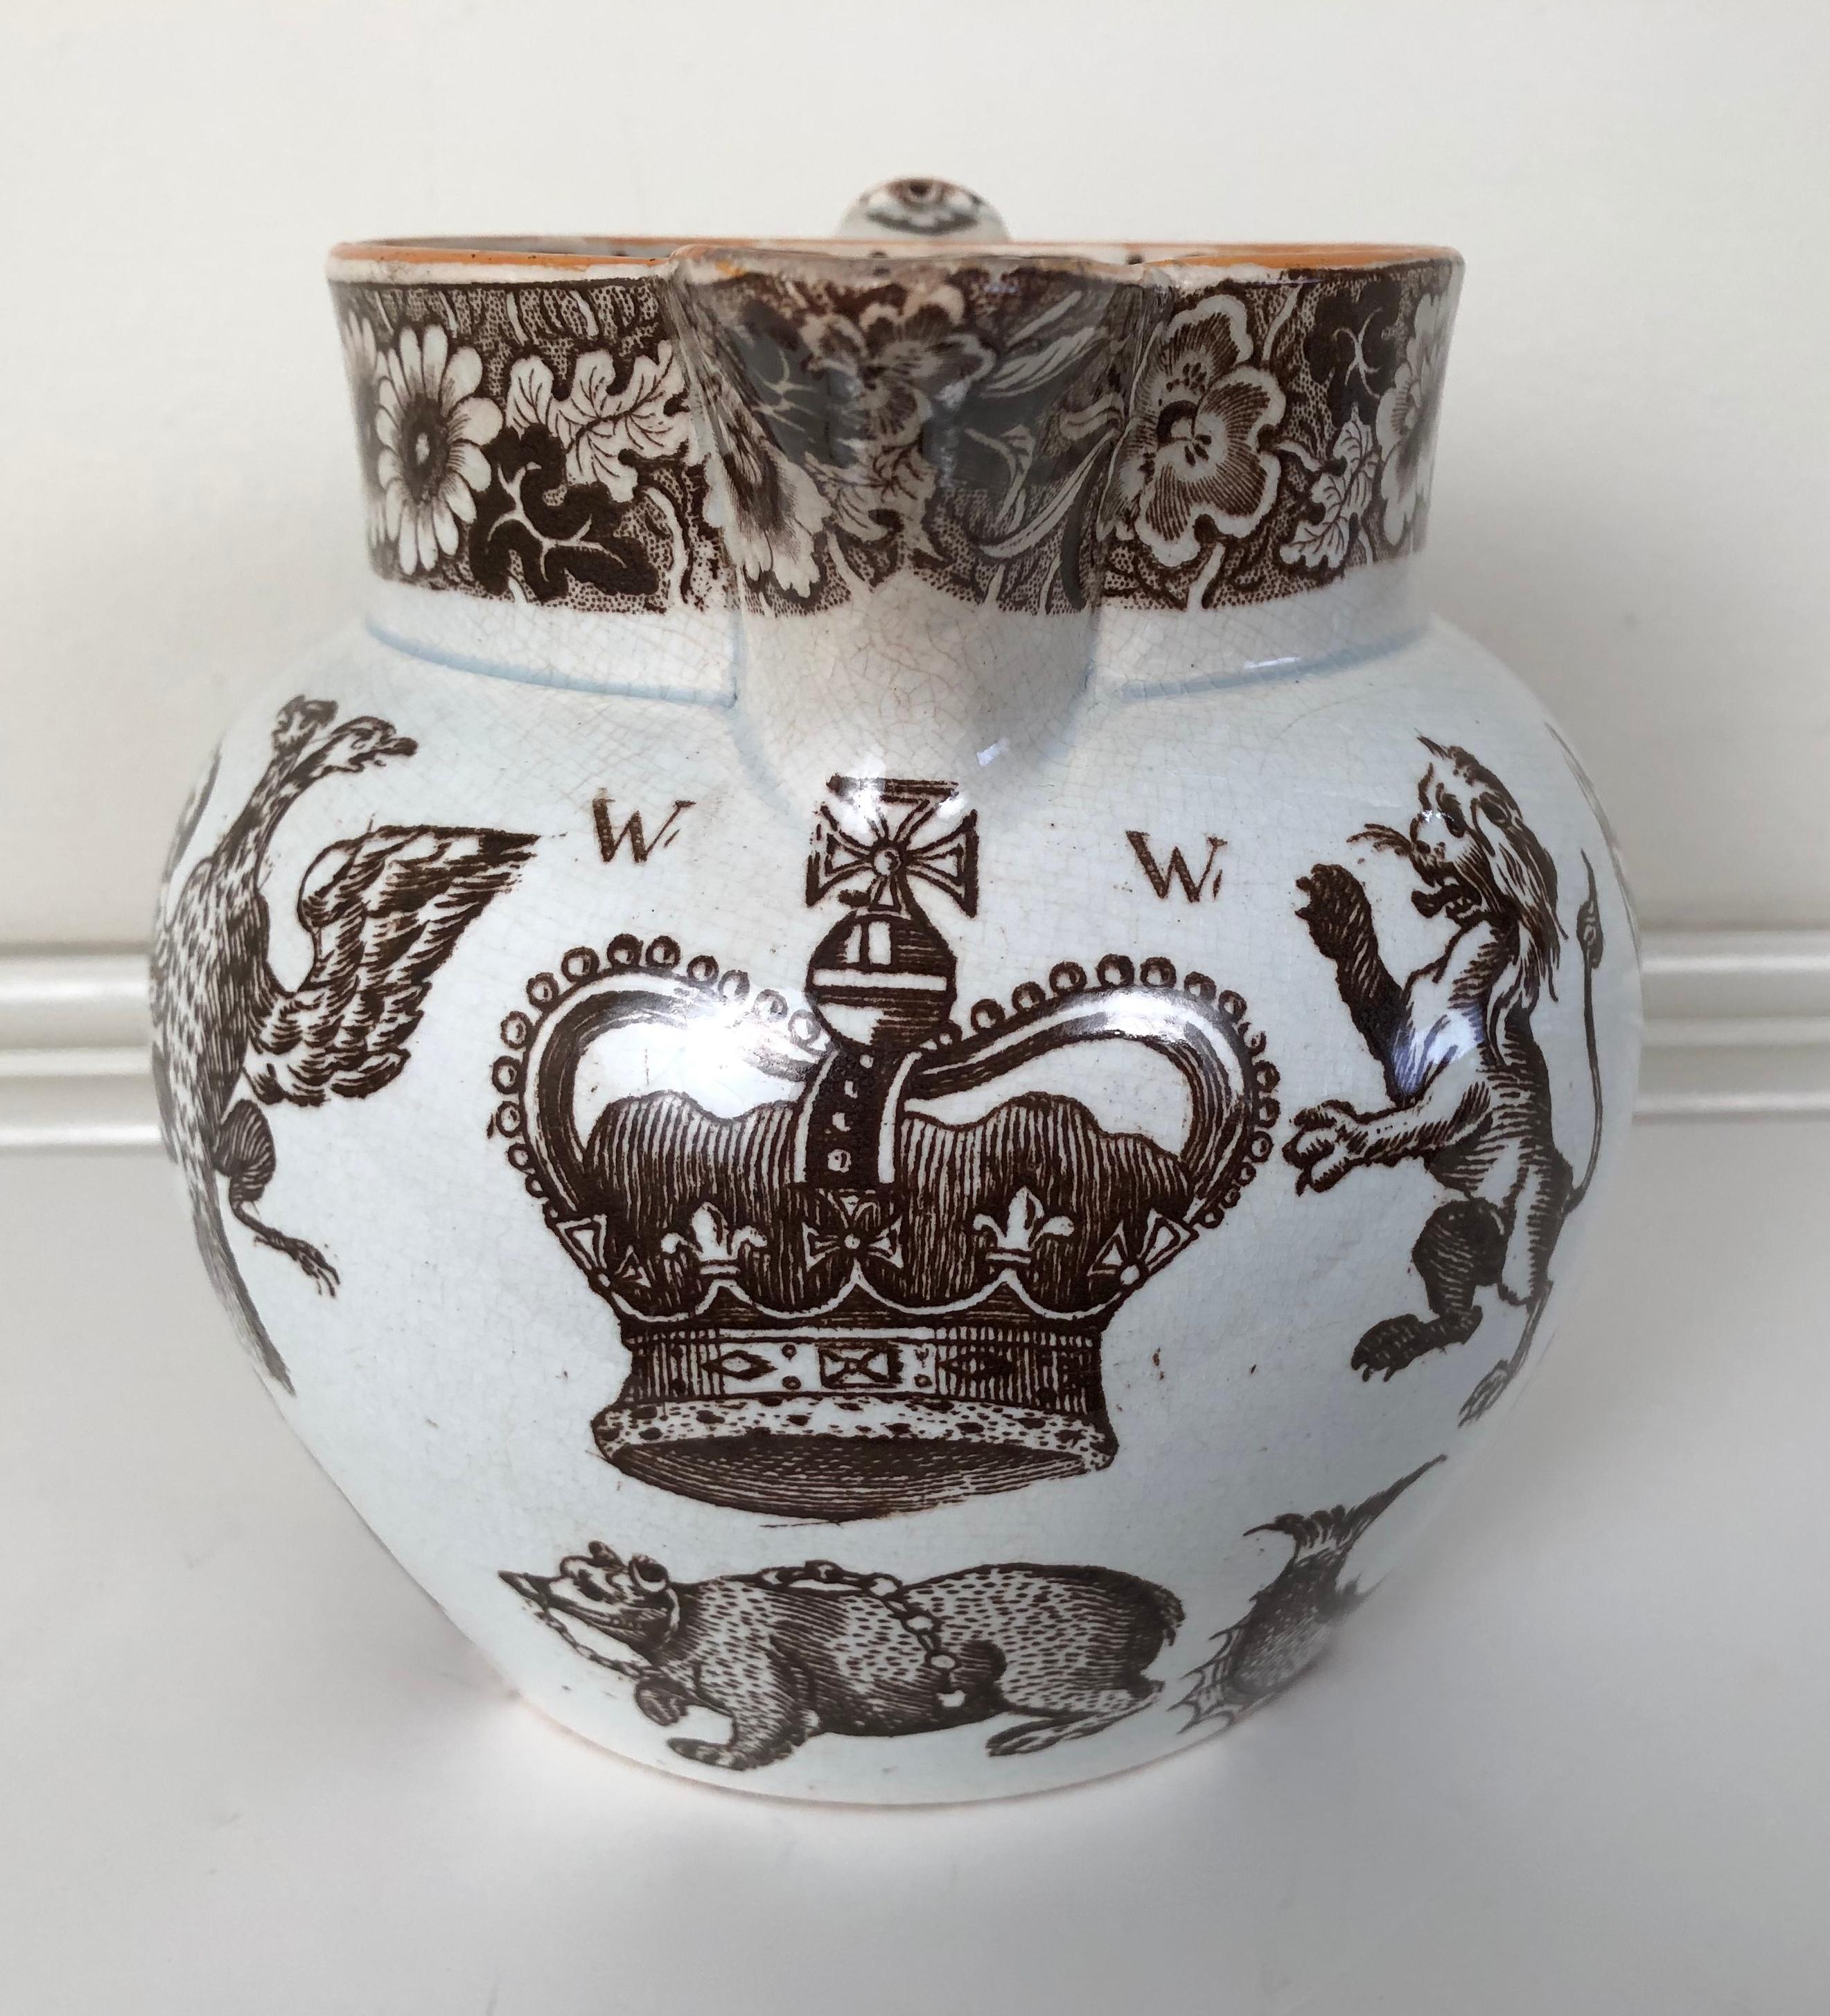 A 19th century Staffordshire pottery brown transferware pitcher with an unusual variety of motifs, inside and out, including a sheaf of wheat, crown, lion rampant, dolphin, imperial double-headed eagle, angel, sea shell, boar, with a stag printed on